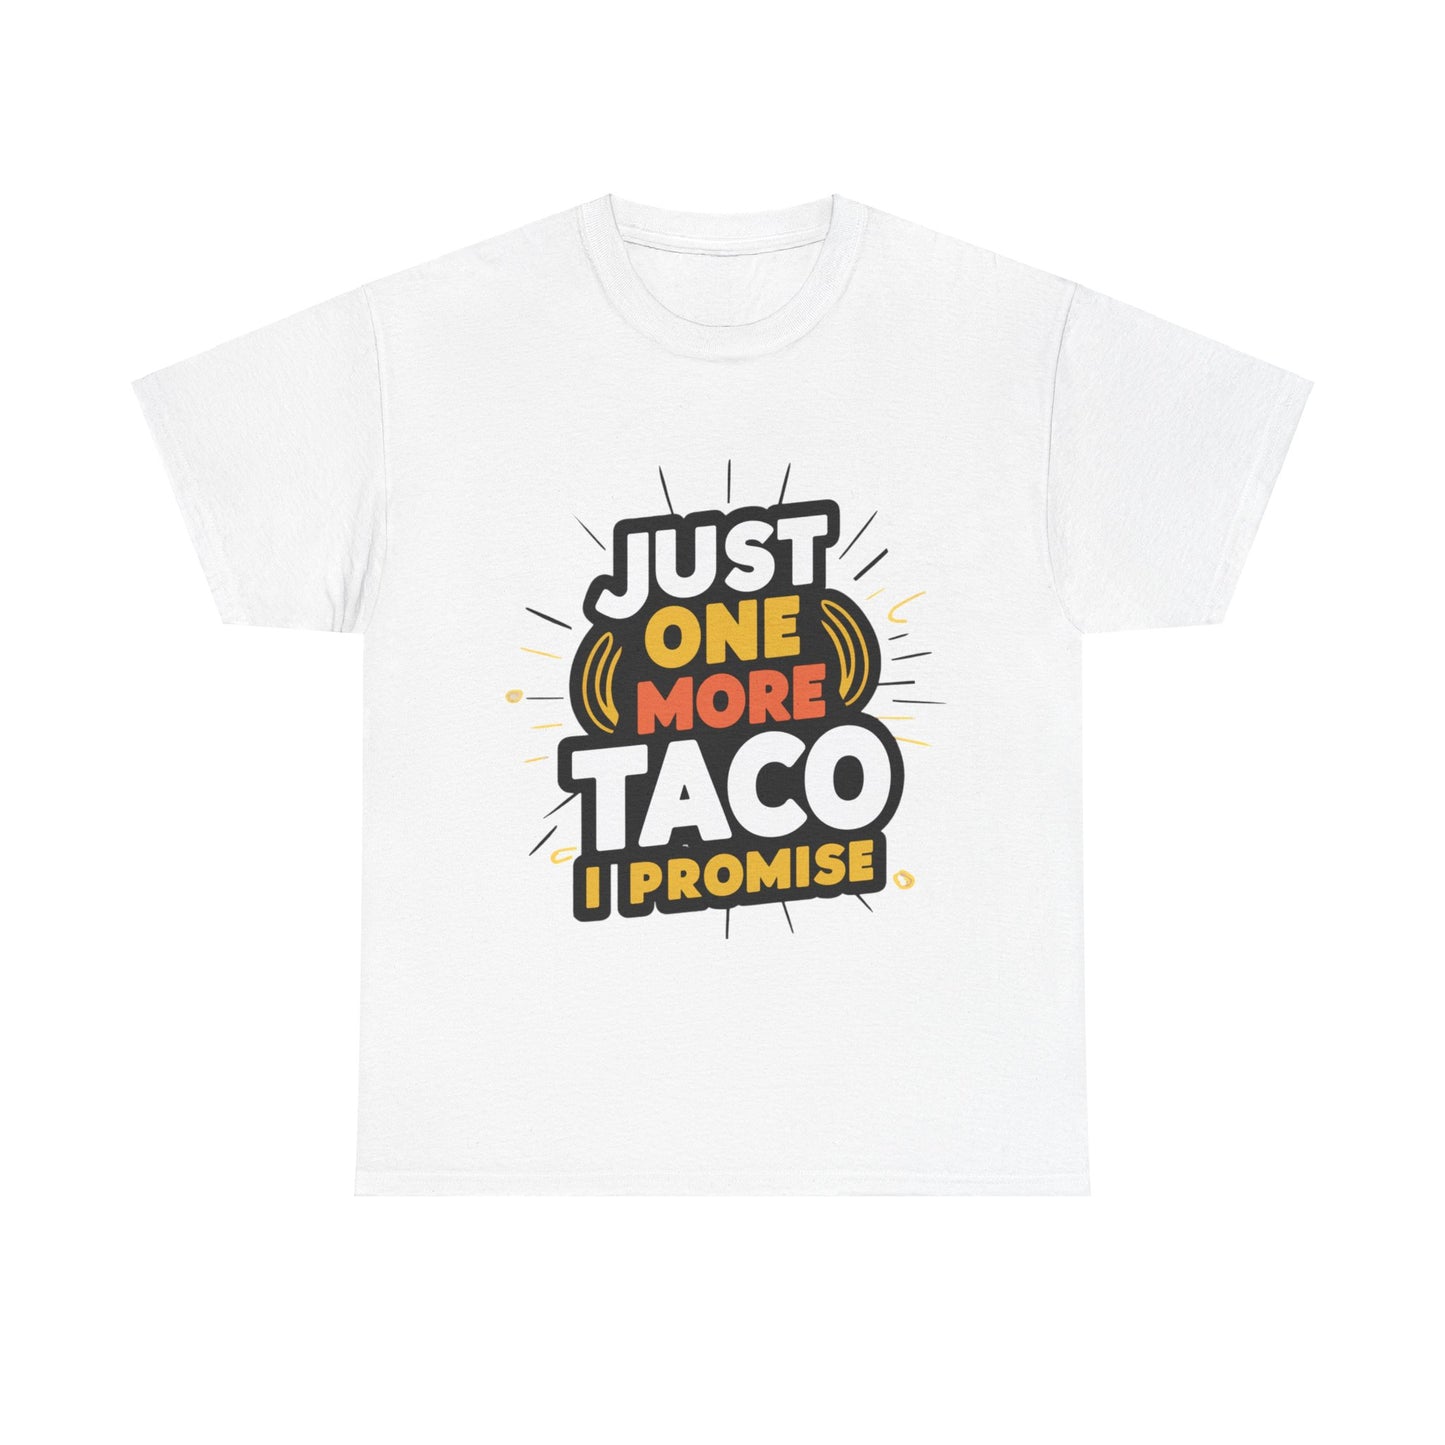 Just One More Taco I Promise Mexican Food Graphic Unisex Heavy Cotton Tee Cotton Funny Humorous Graphic Soft Premium Unisex Men Women White T-shirt Birthday Gift-10